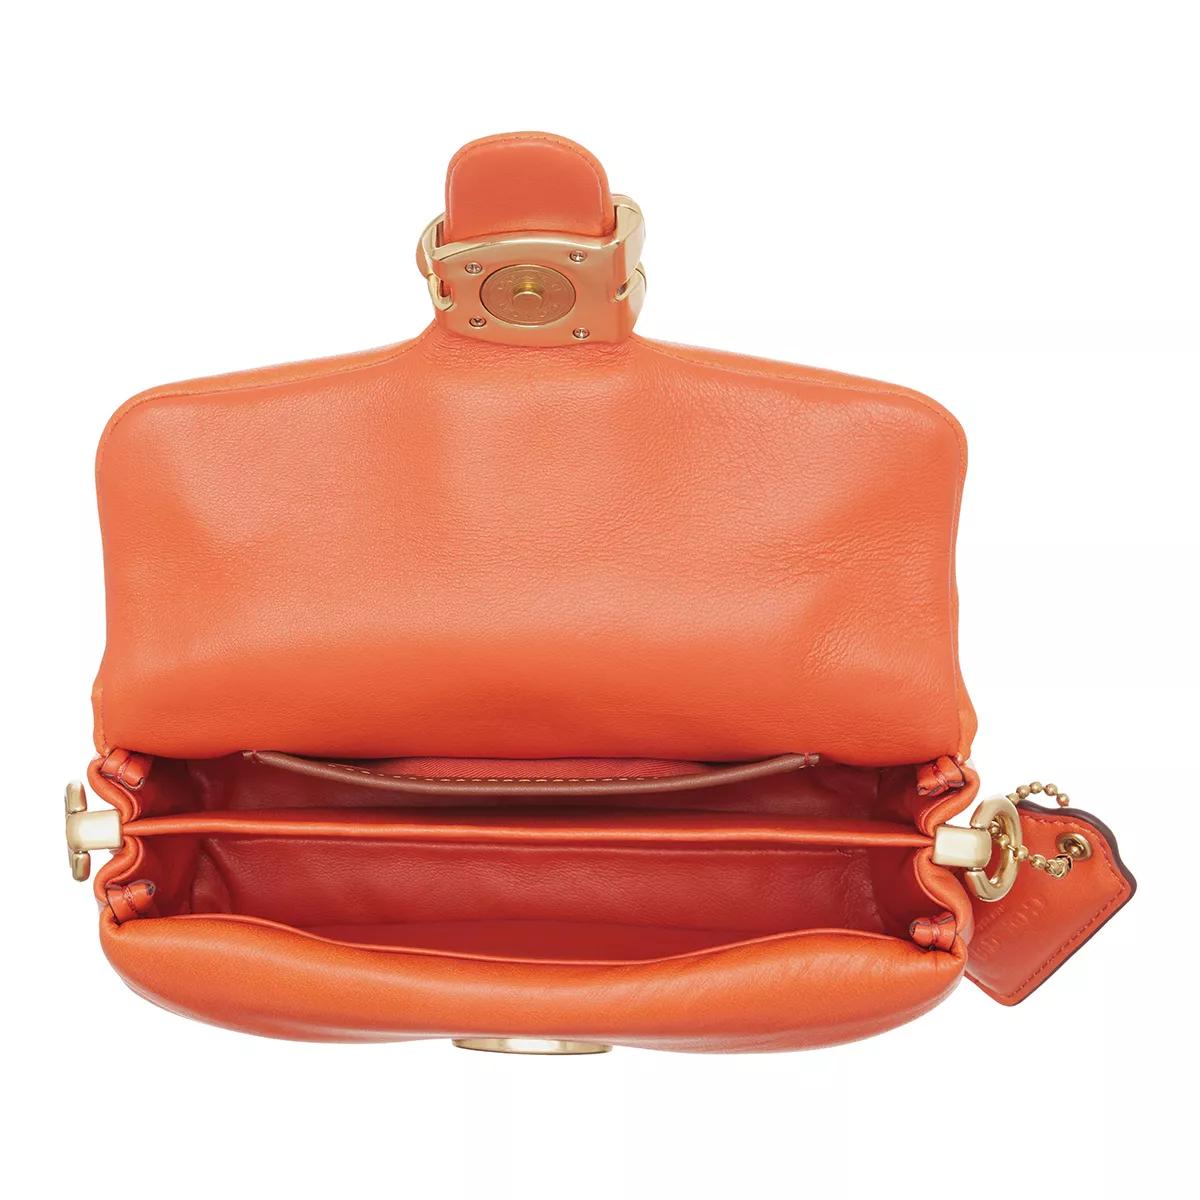 COACH Tabby Pillow Leather Shoulder Bag in Orange